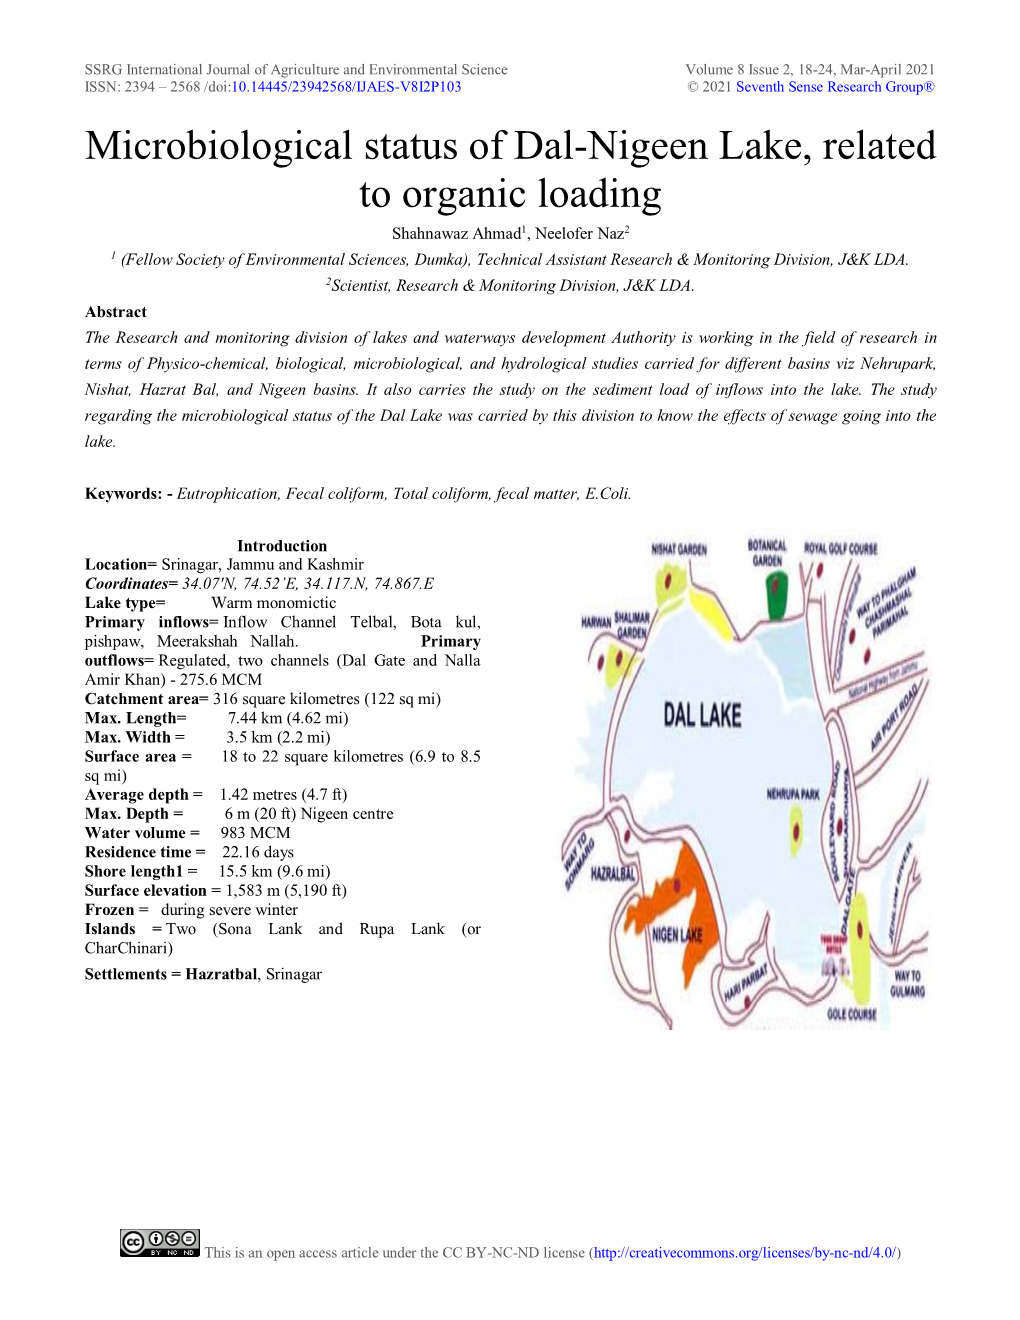 Microbiological Status of Dal-Nigeen Lake, Related to Organic Loading